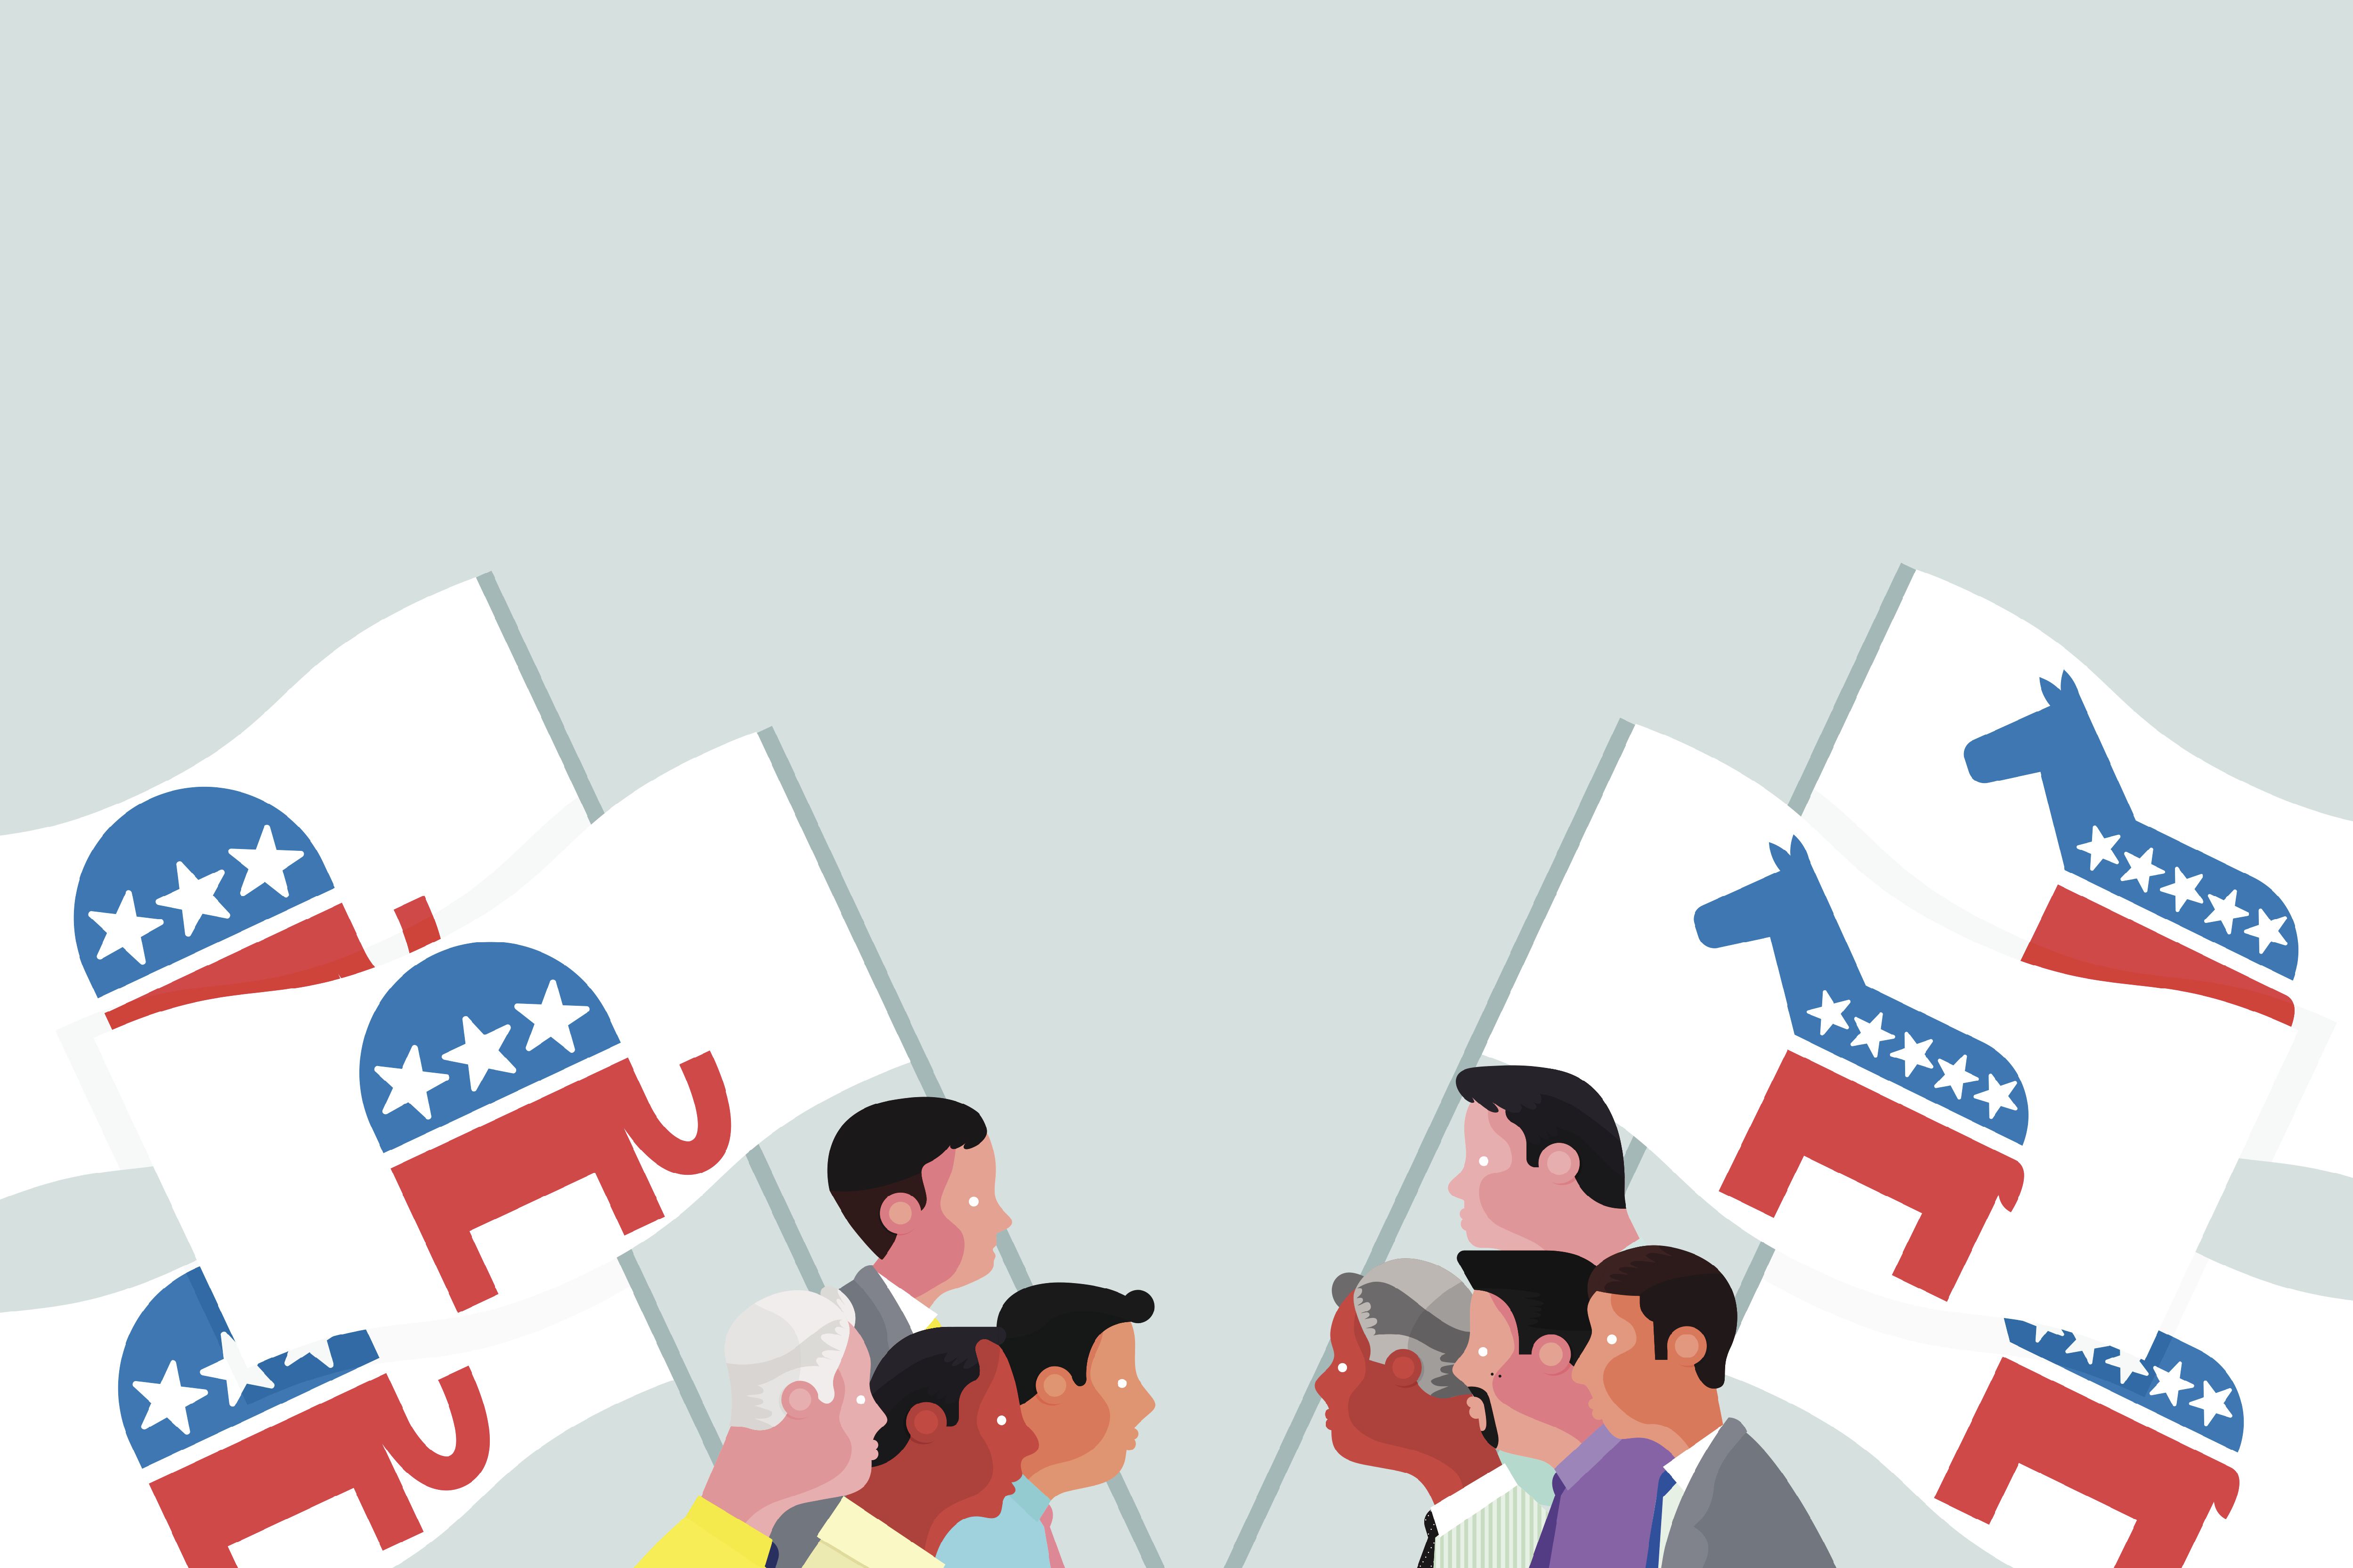 Talking Politics at Work - Why and How to Avoid It